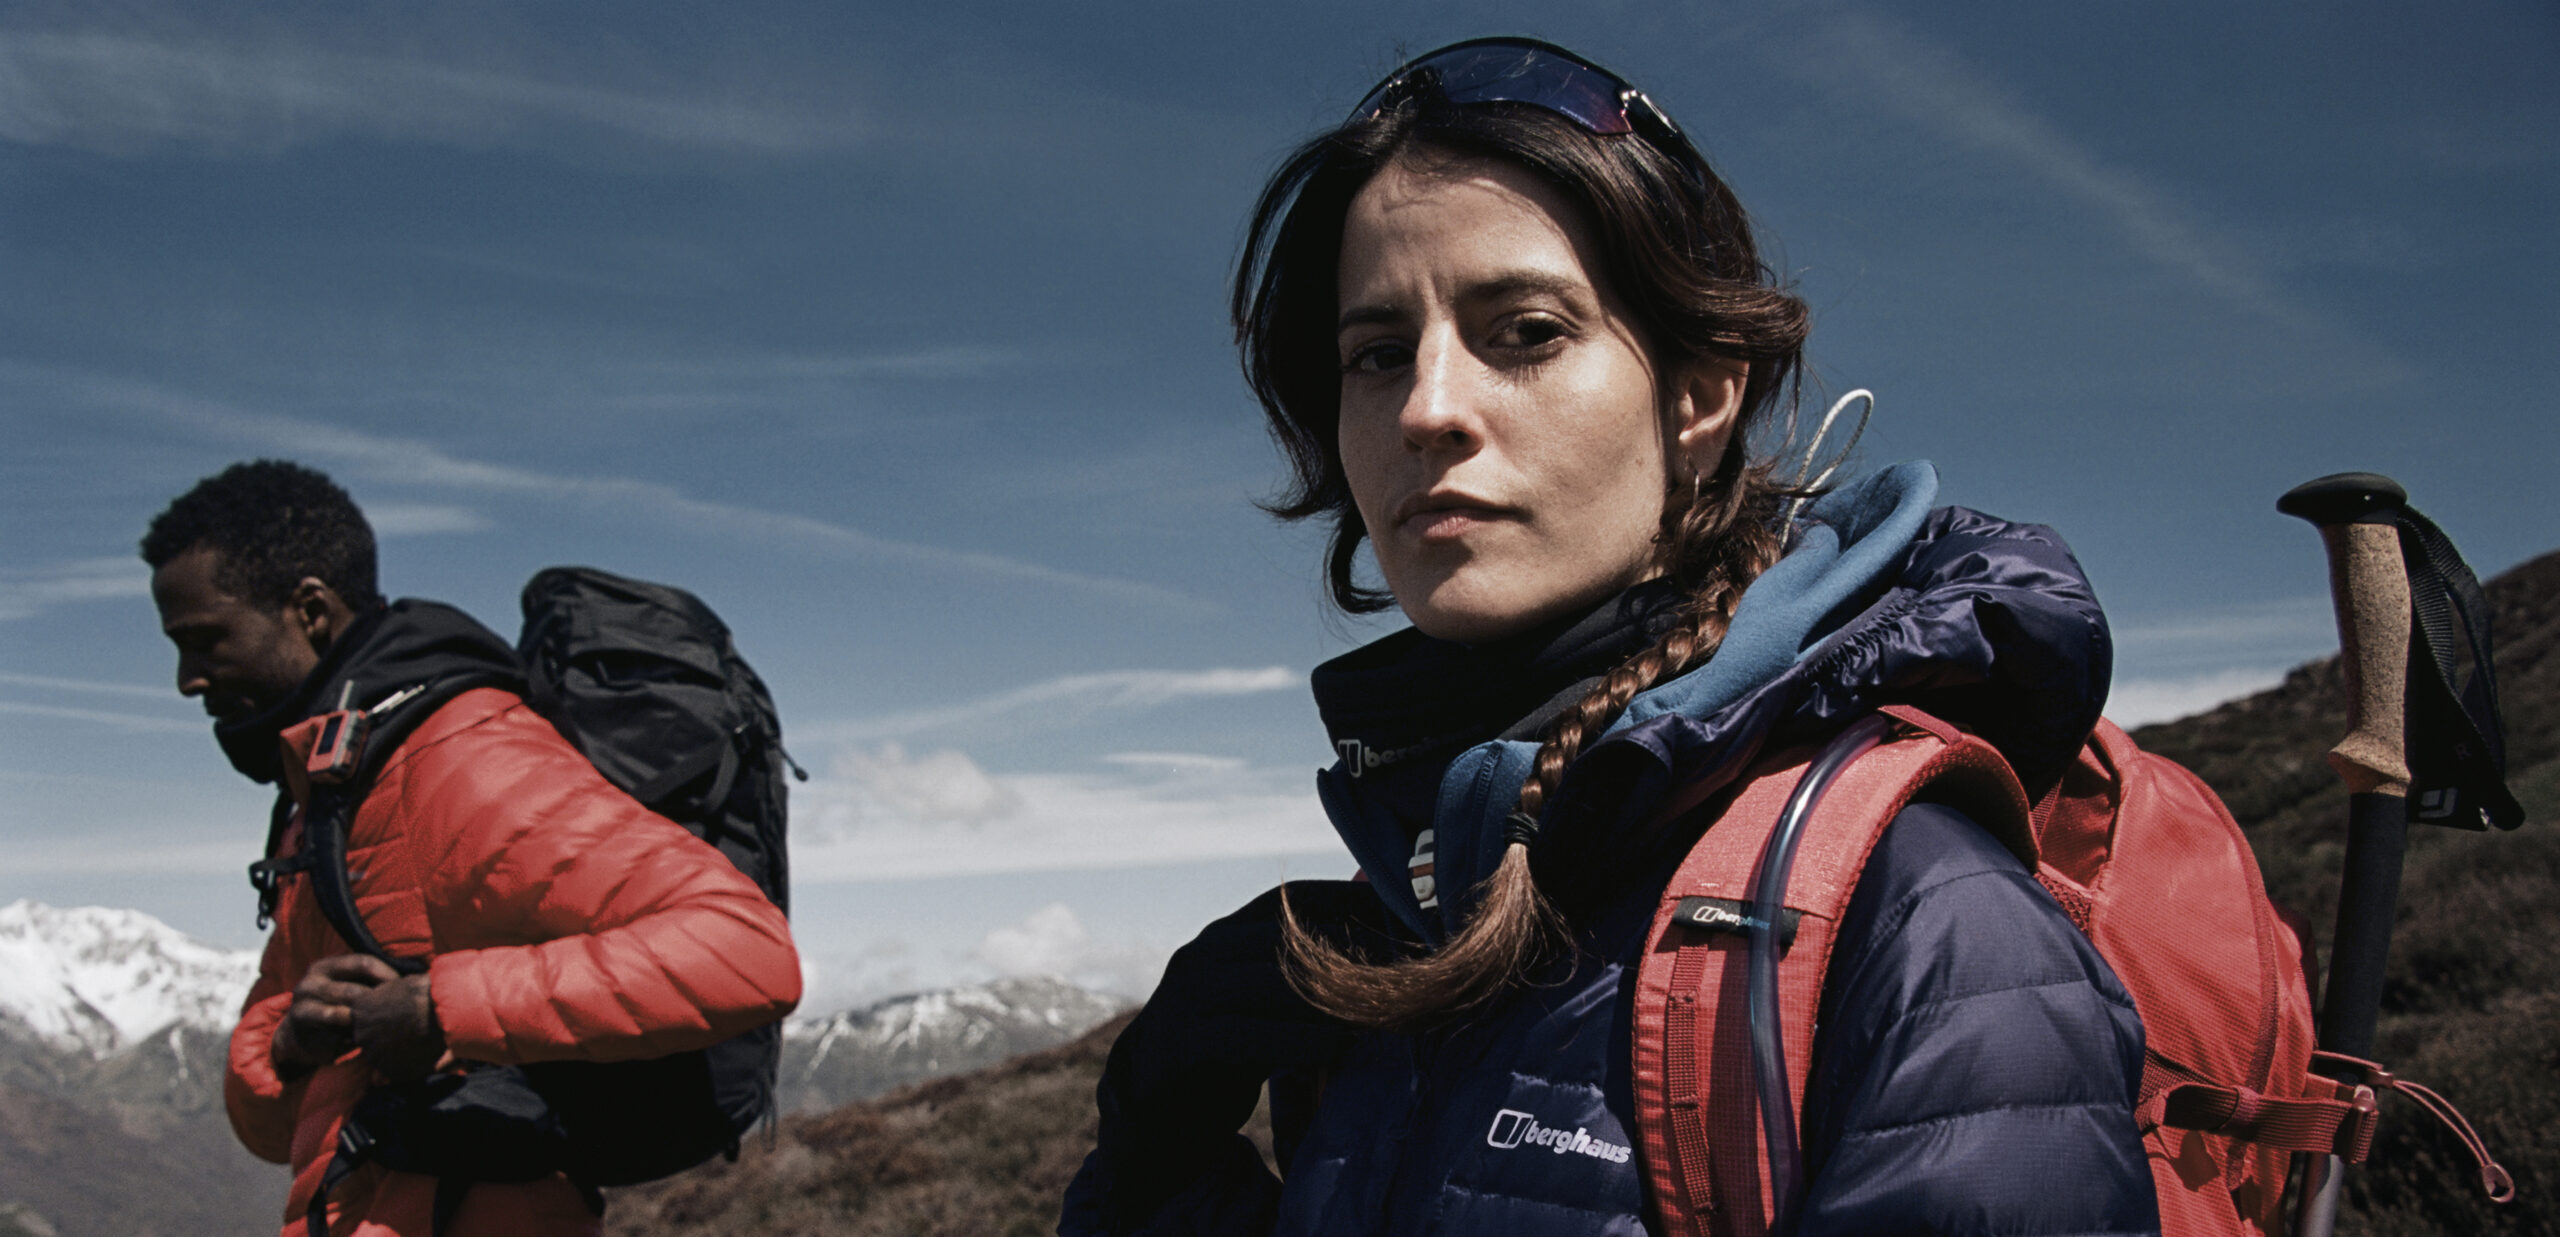 Berghaus heats up winter marketing with ‘Cold Studies’ campaign